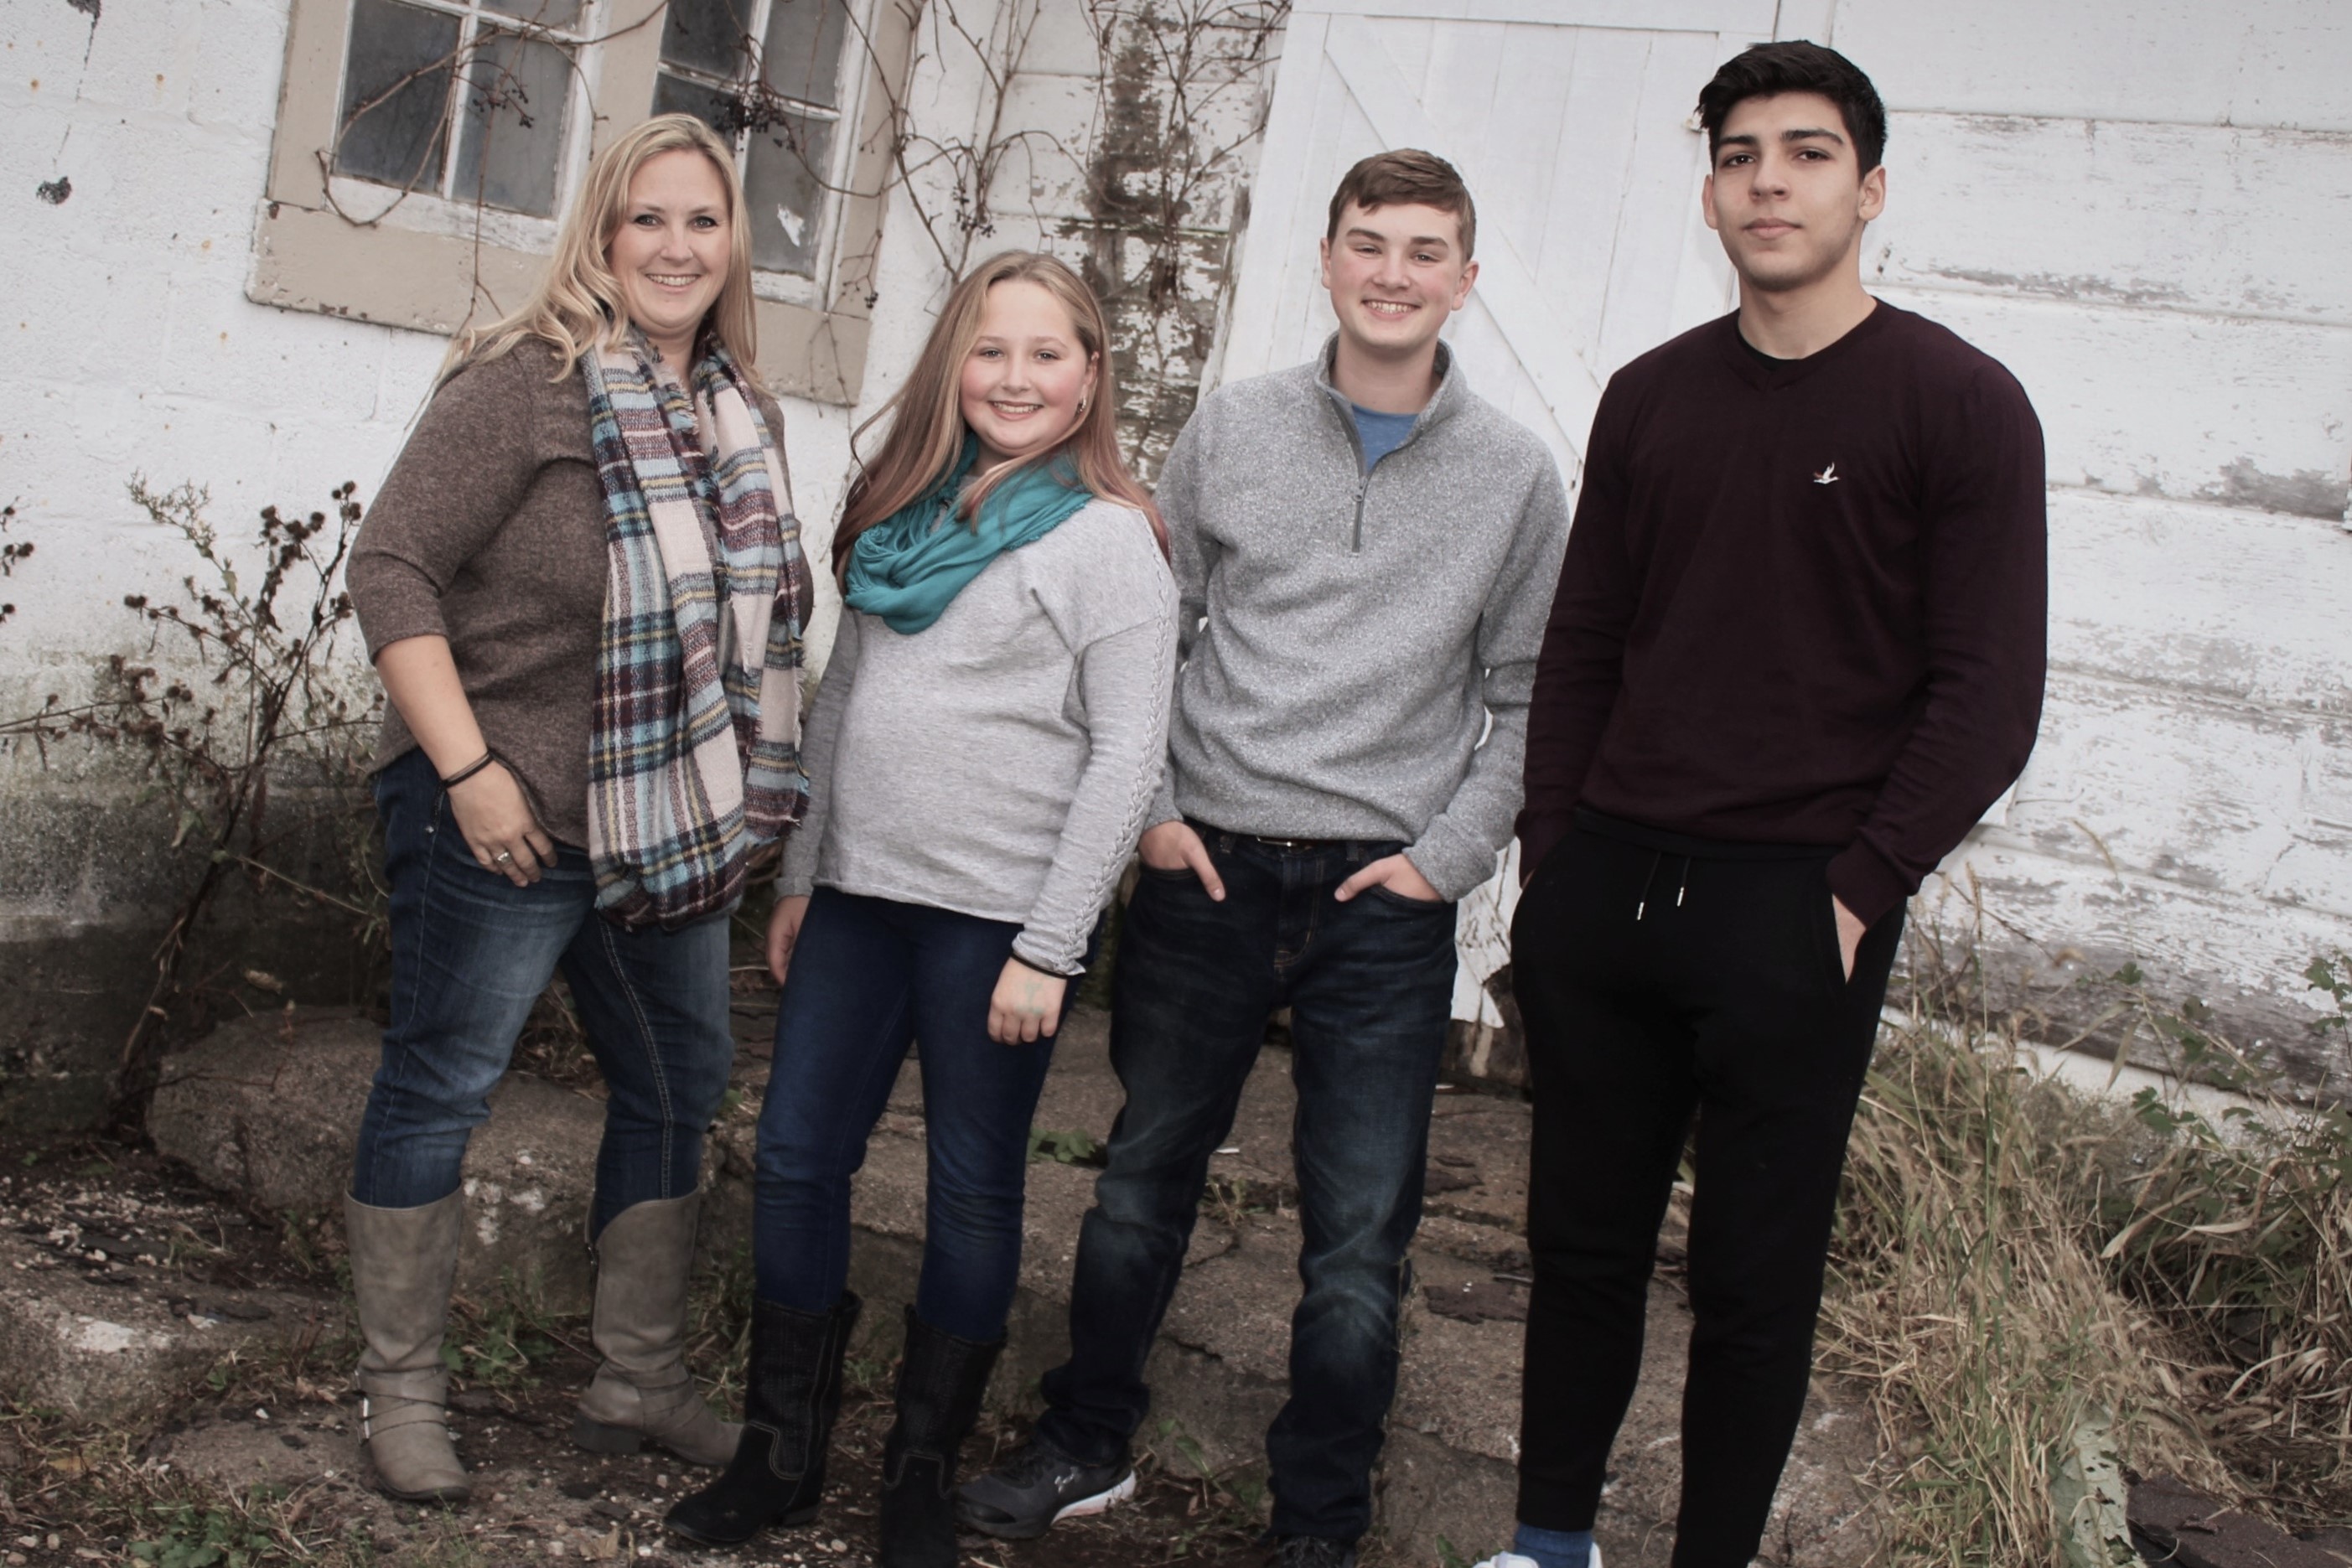 Marketing and Communication Director, Shannon Christle and her children Caleb, Jaiden and Exchange tudent Memet